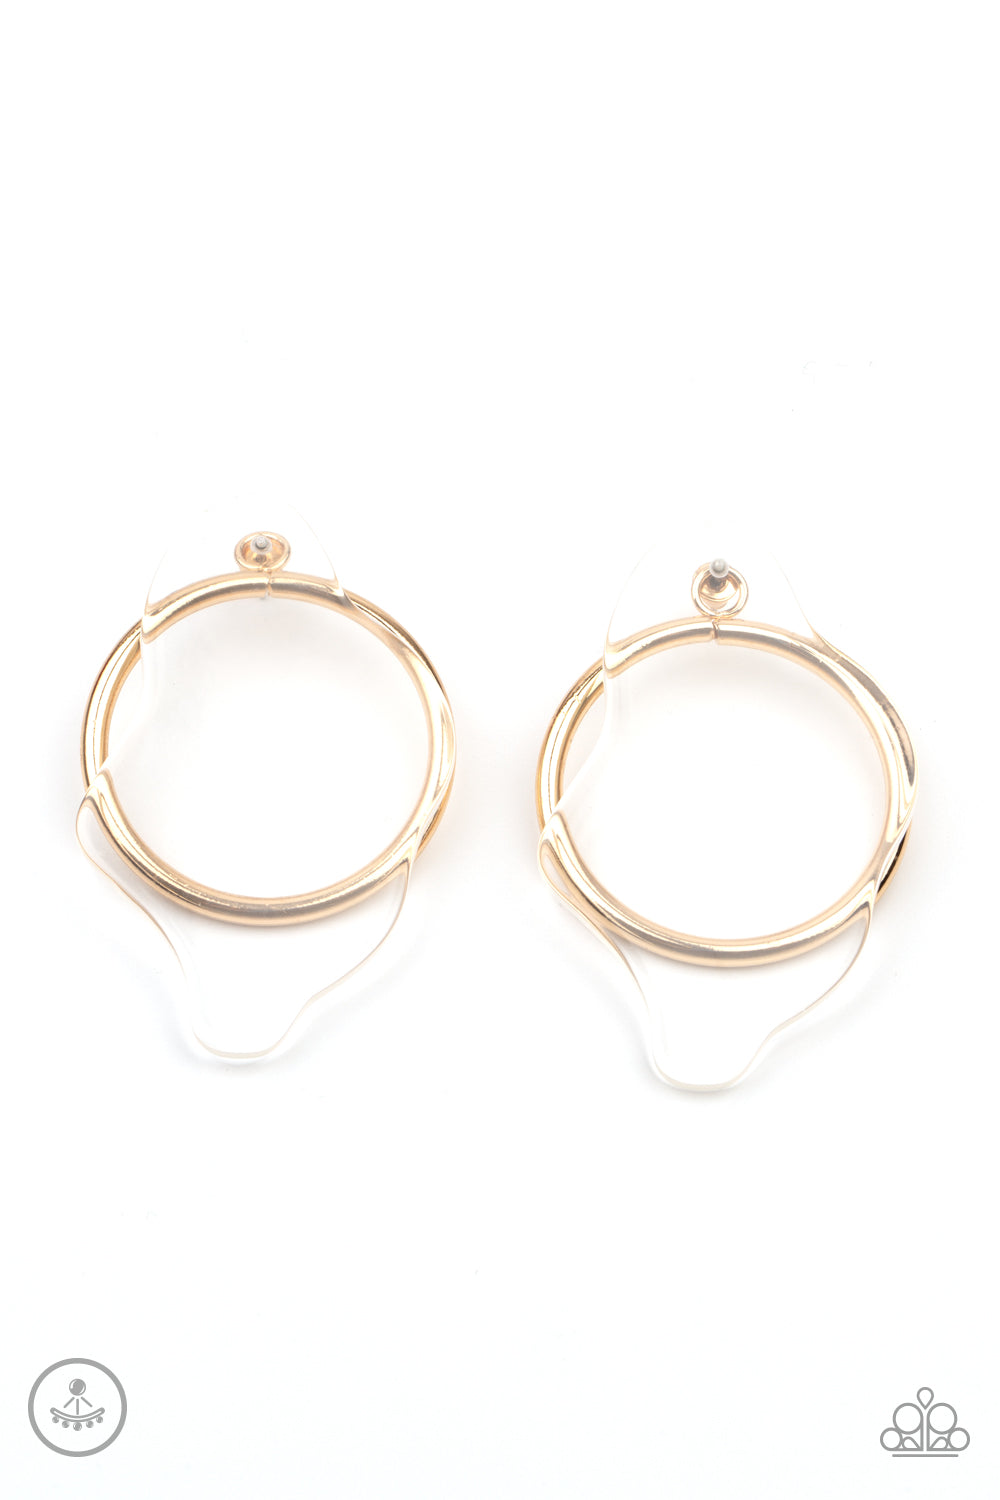 Paparazzi - Clear The Way! - Gold Earrings